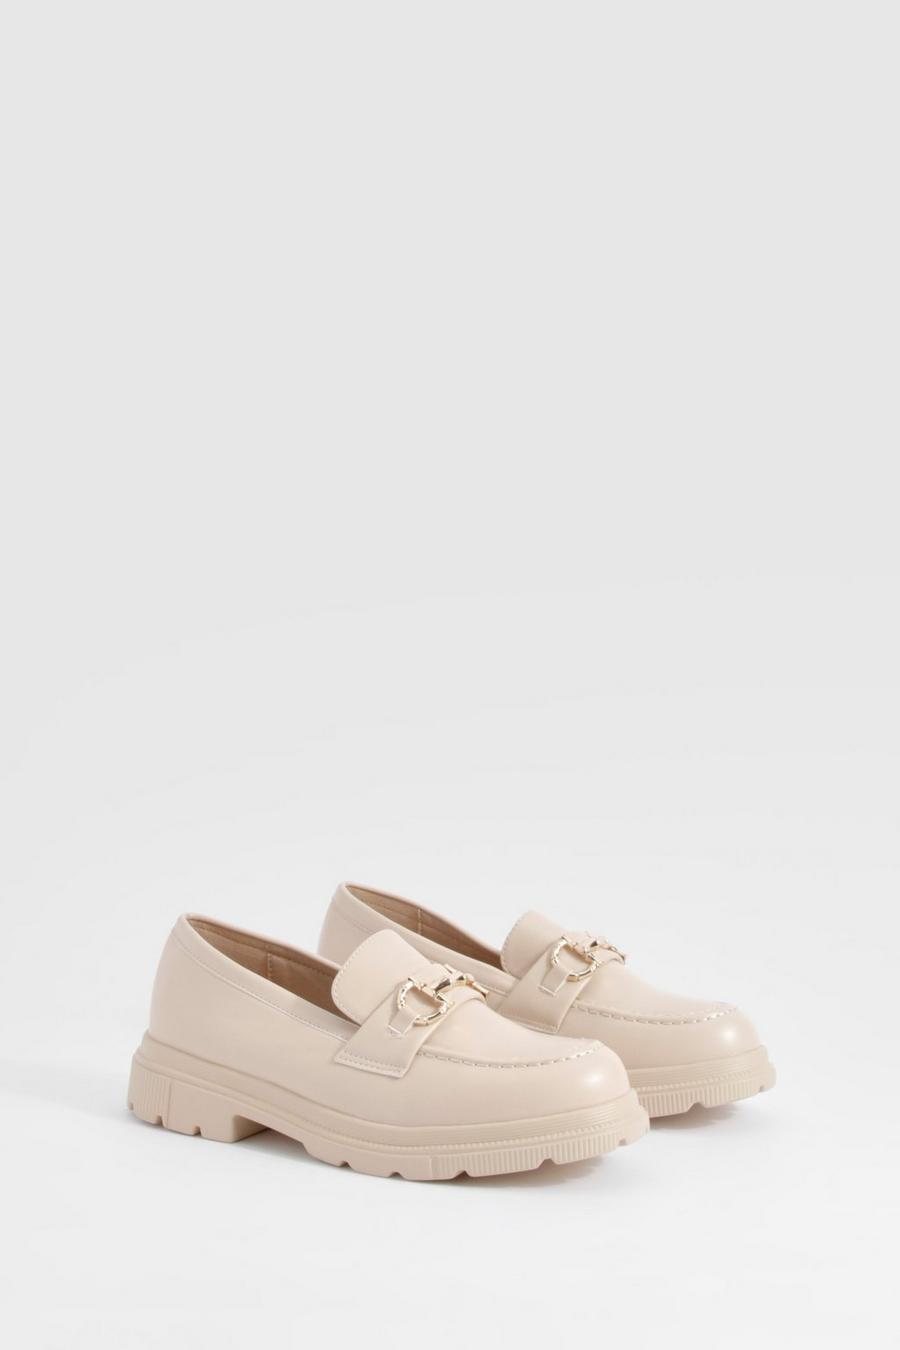 Beige T Bar Chunky Loafers   